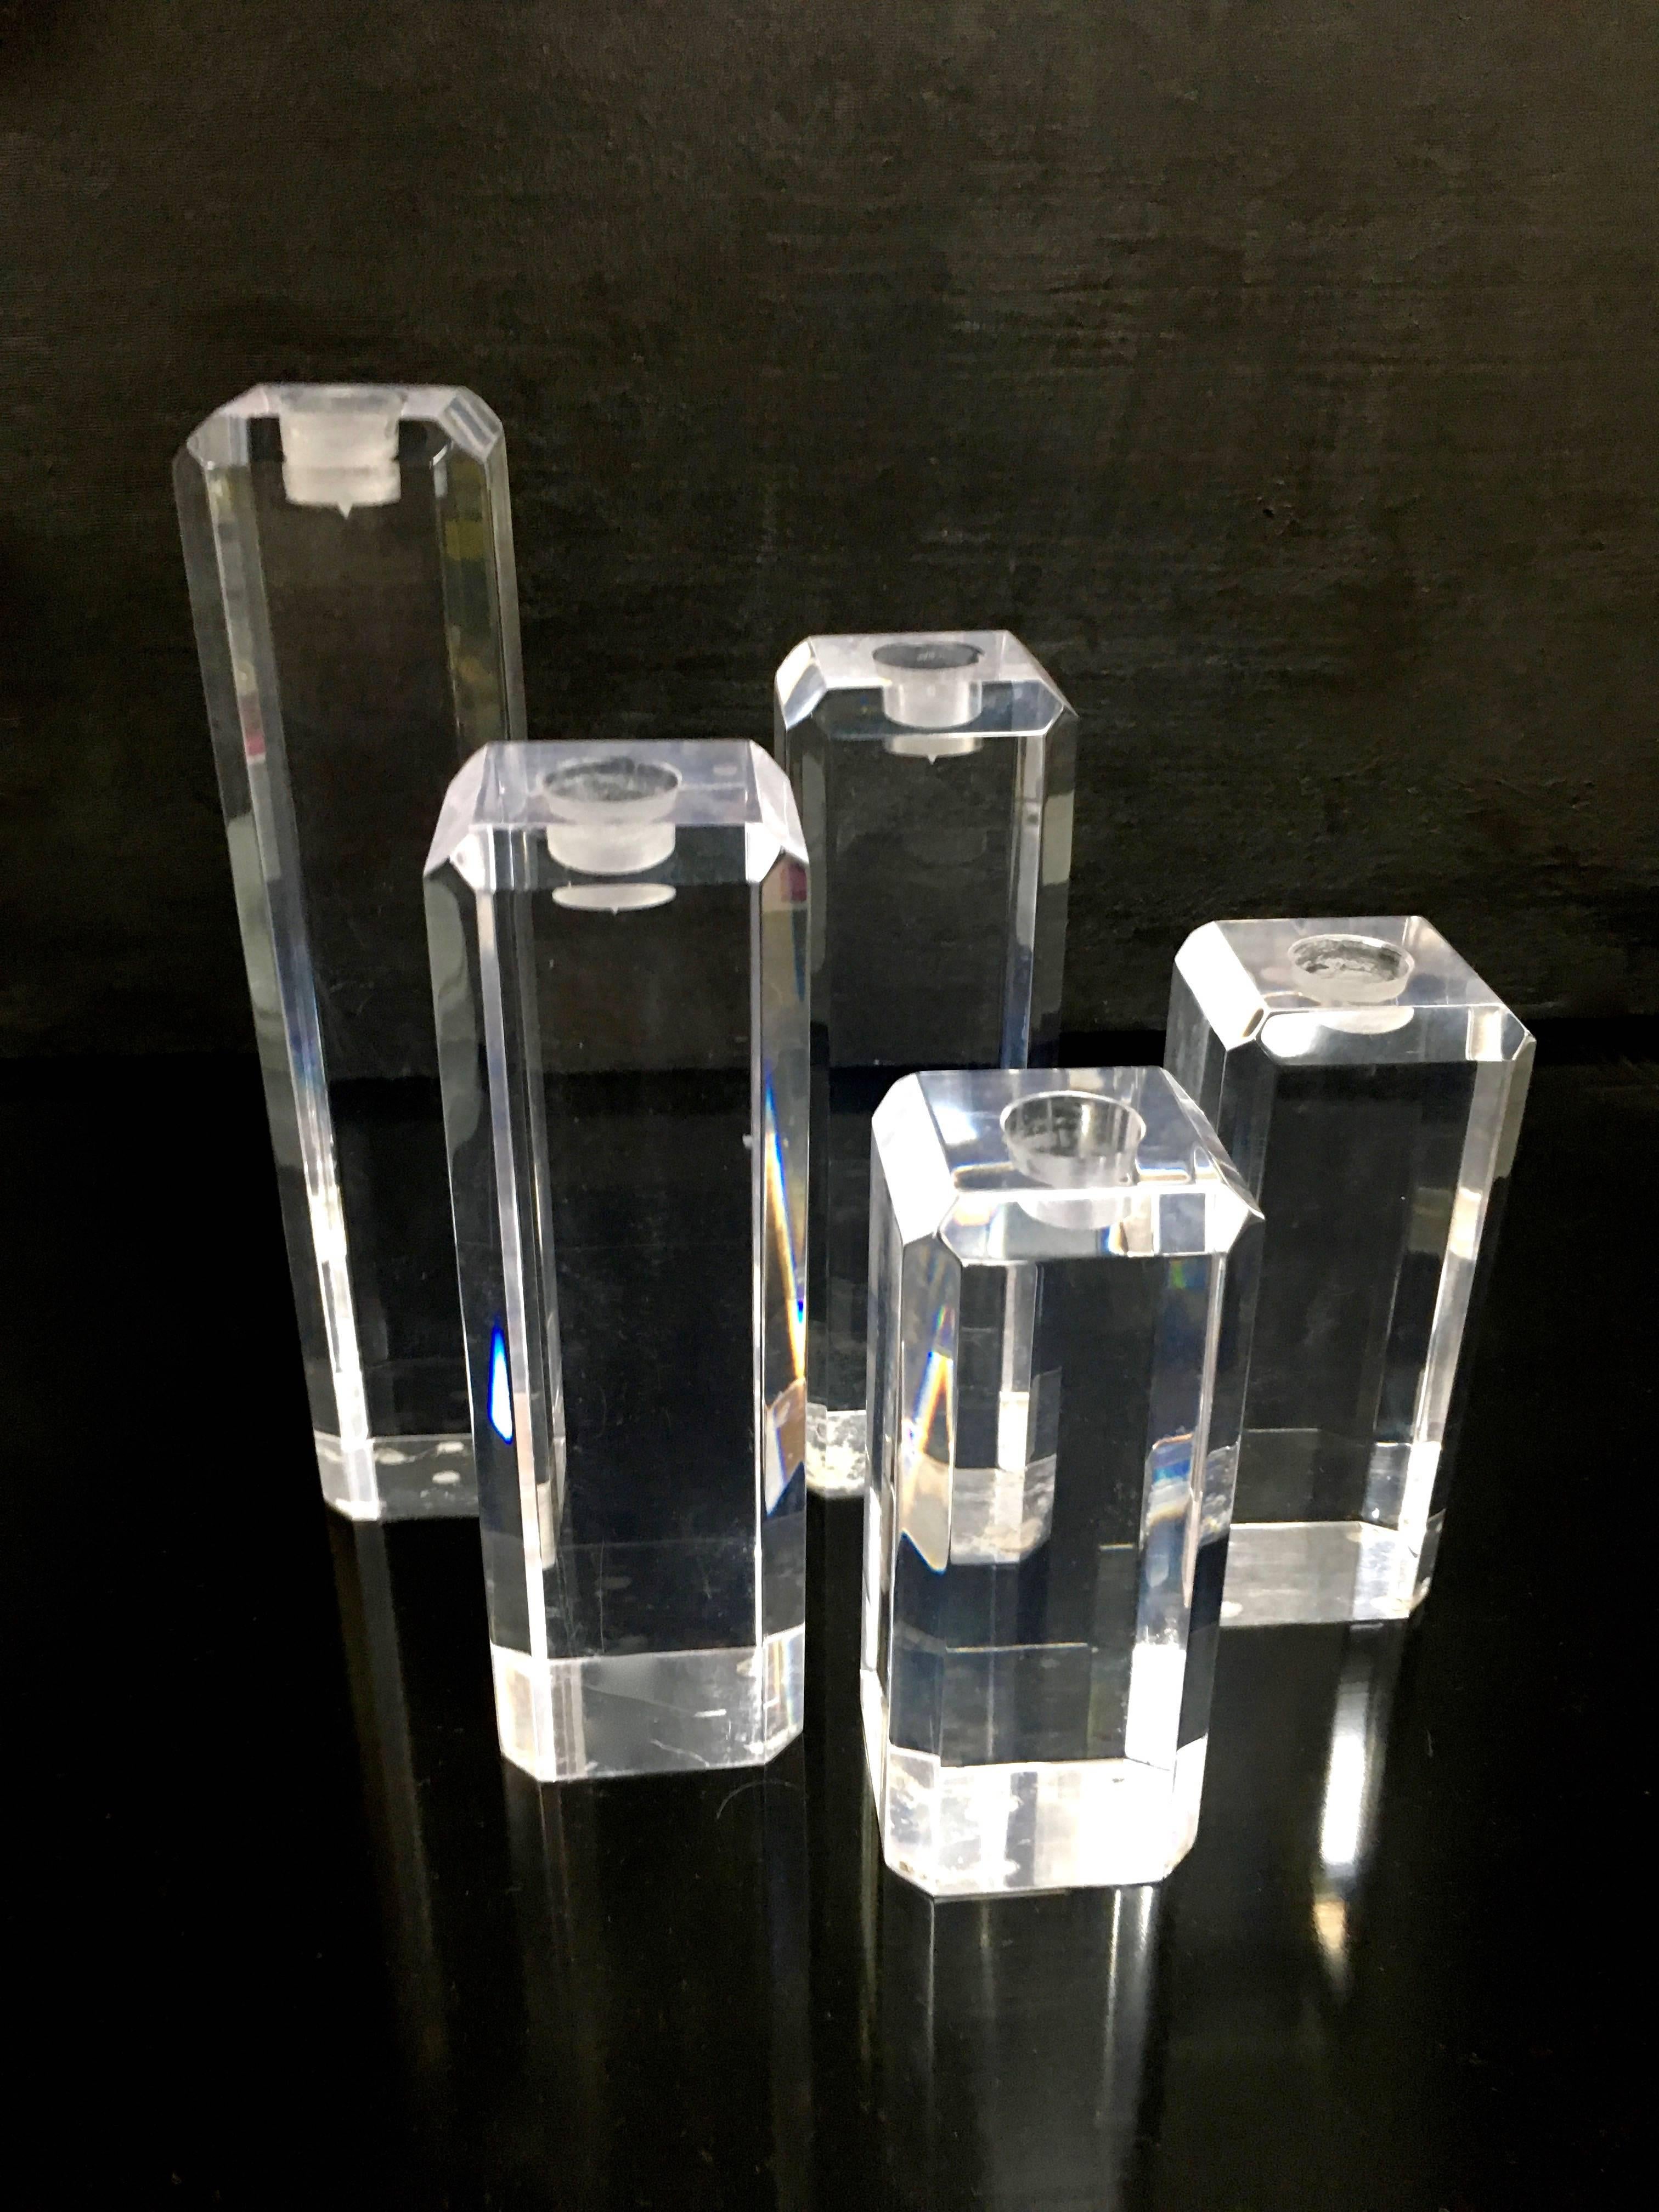 An important grouping of five Acrylic candlesticks in varying sizes - a stunning focal point for the dining table, console or outside dinner party.

All are 2.5" Square and two 6", two 8" and two 10"